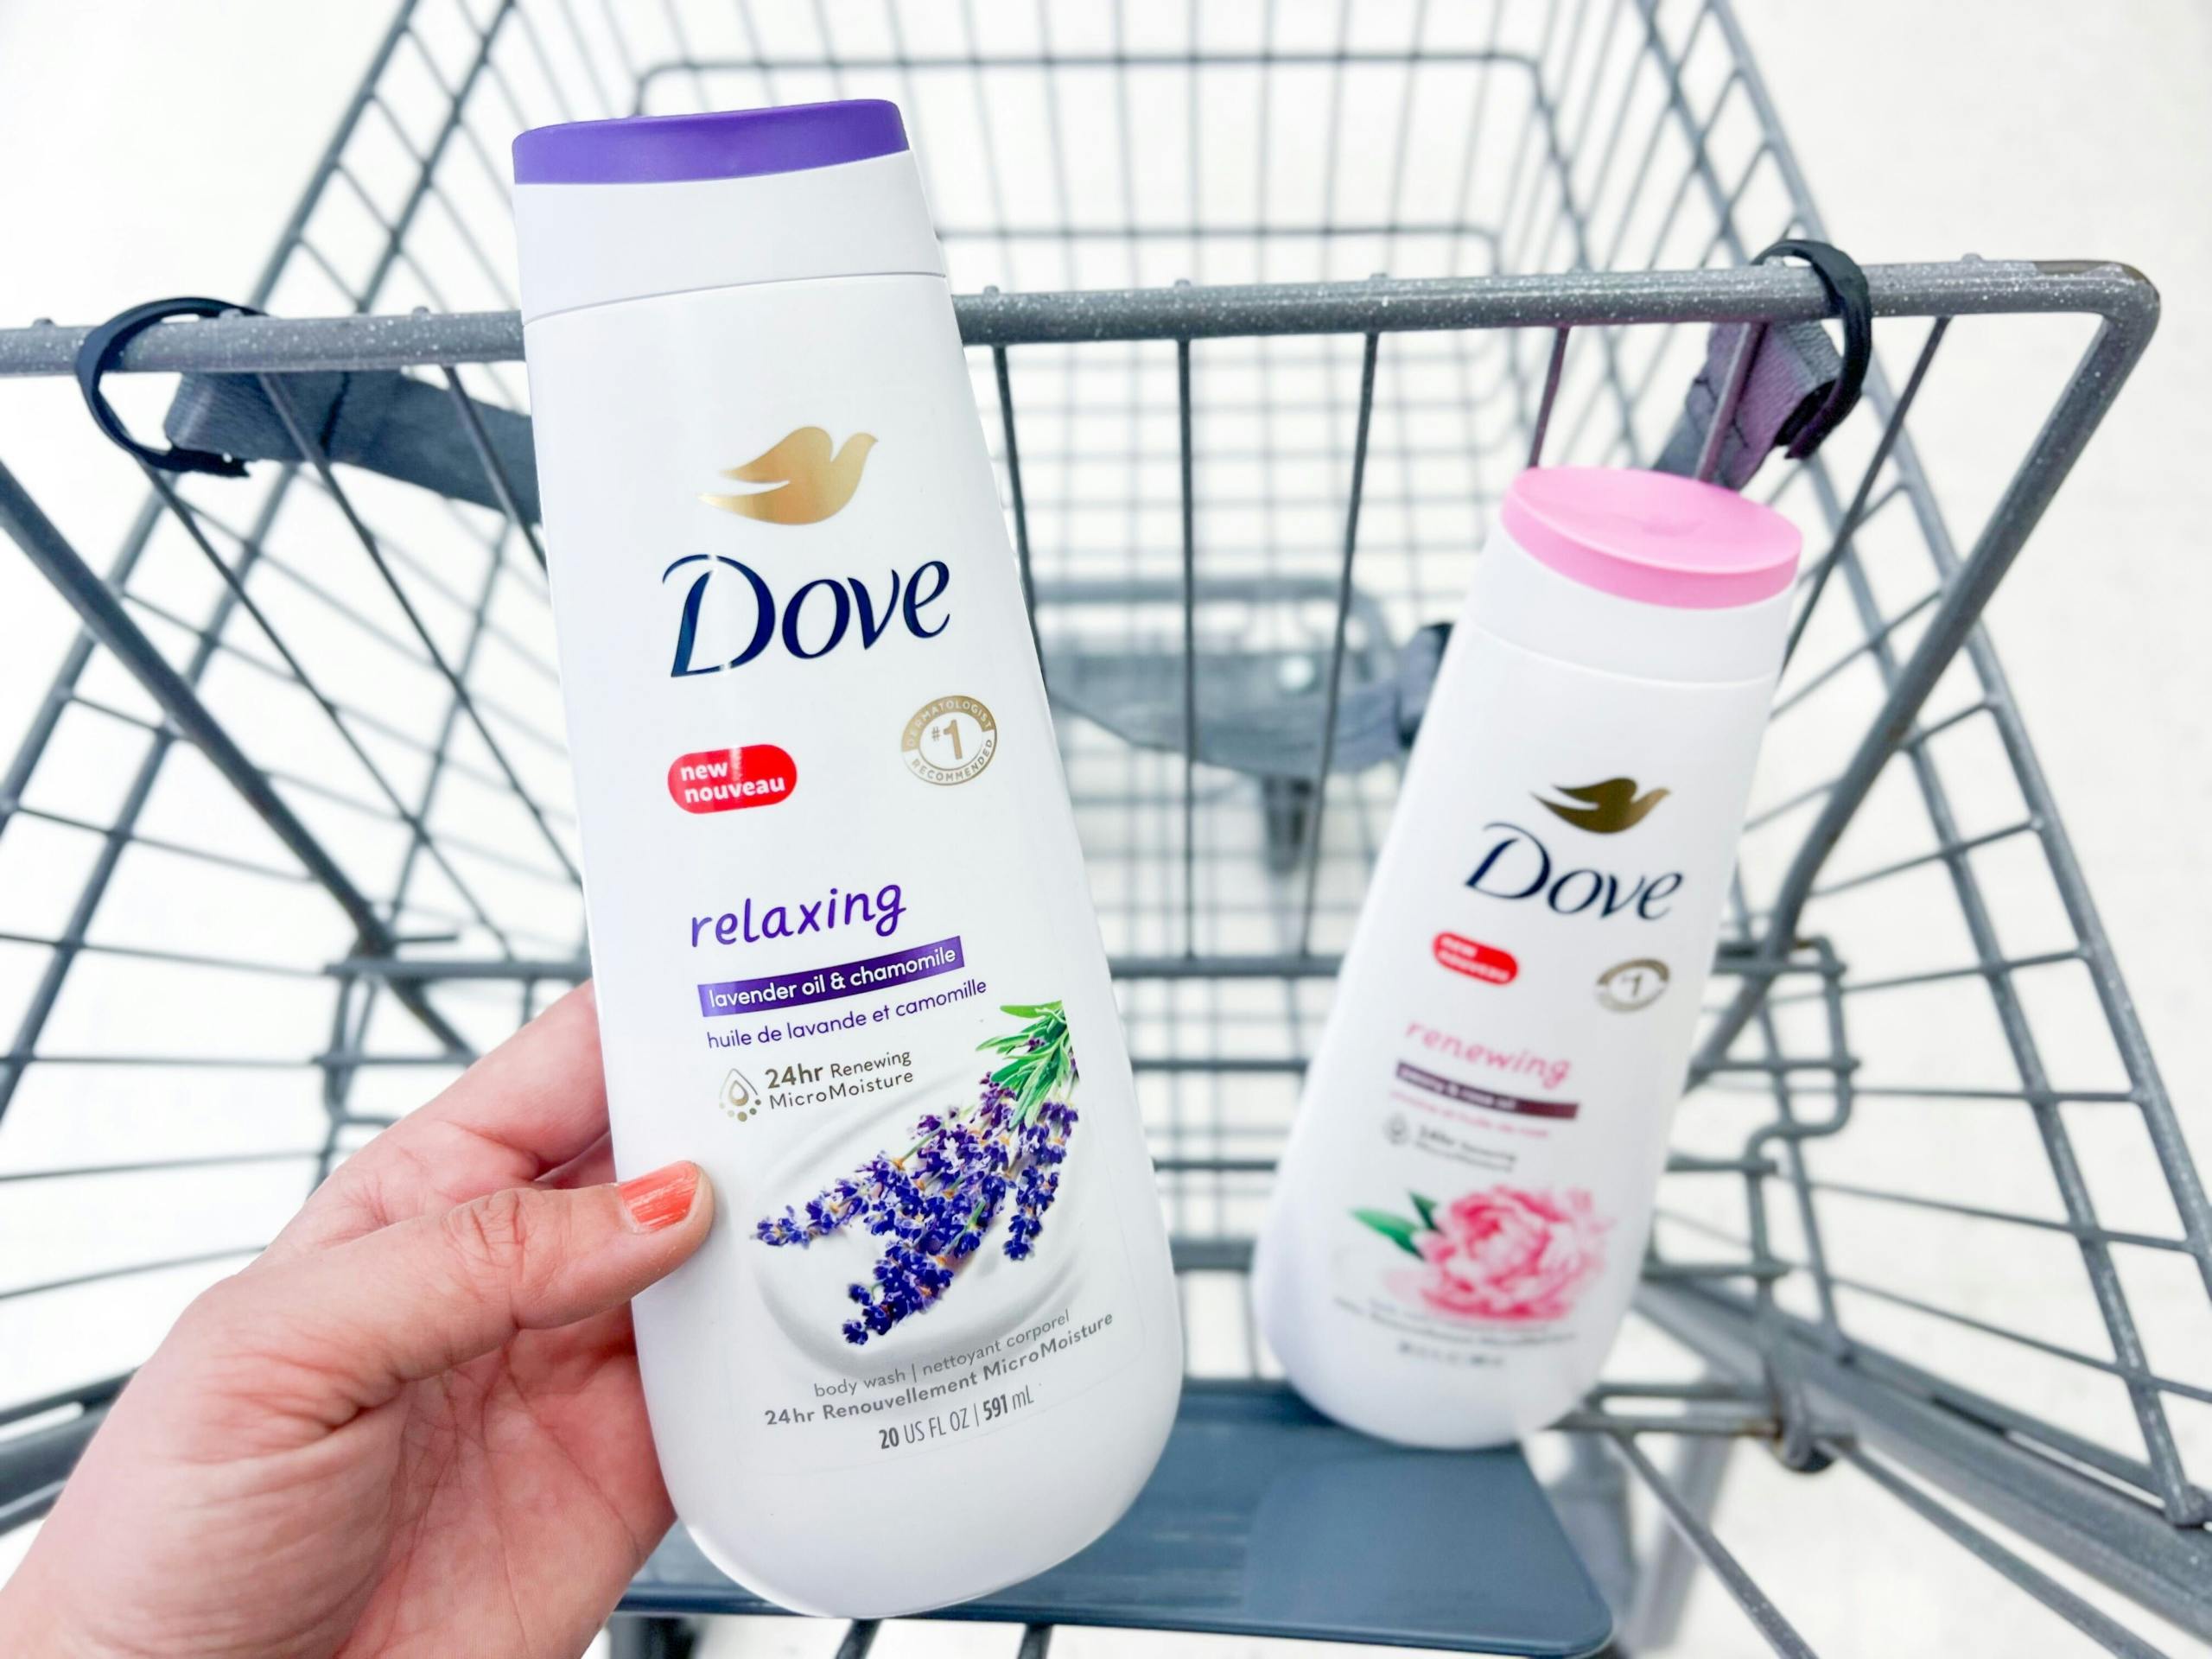 two bottles of dove body wash in cart